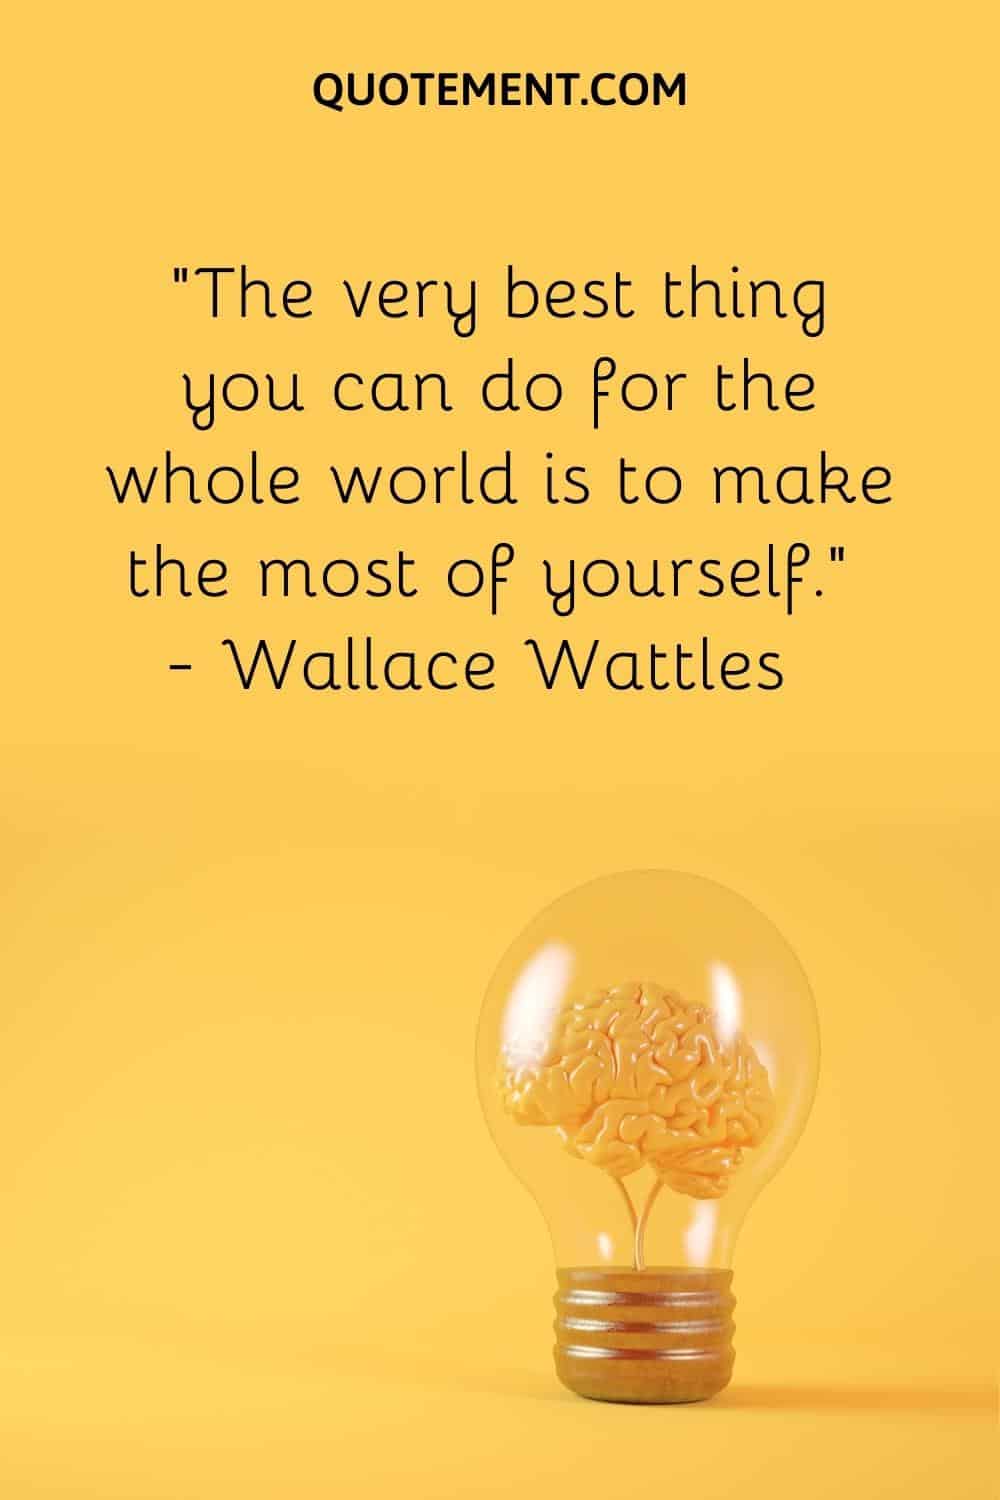 “The very best thing you can do for the whole world is to make the most of yourself.” — Wallace Wattles